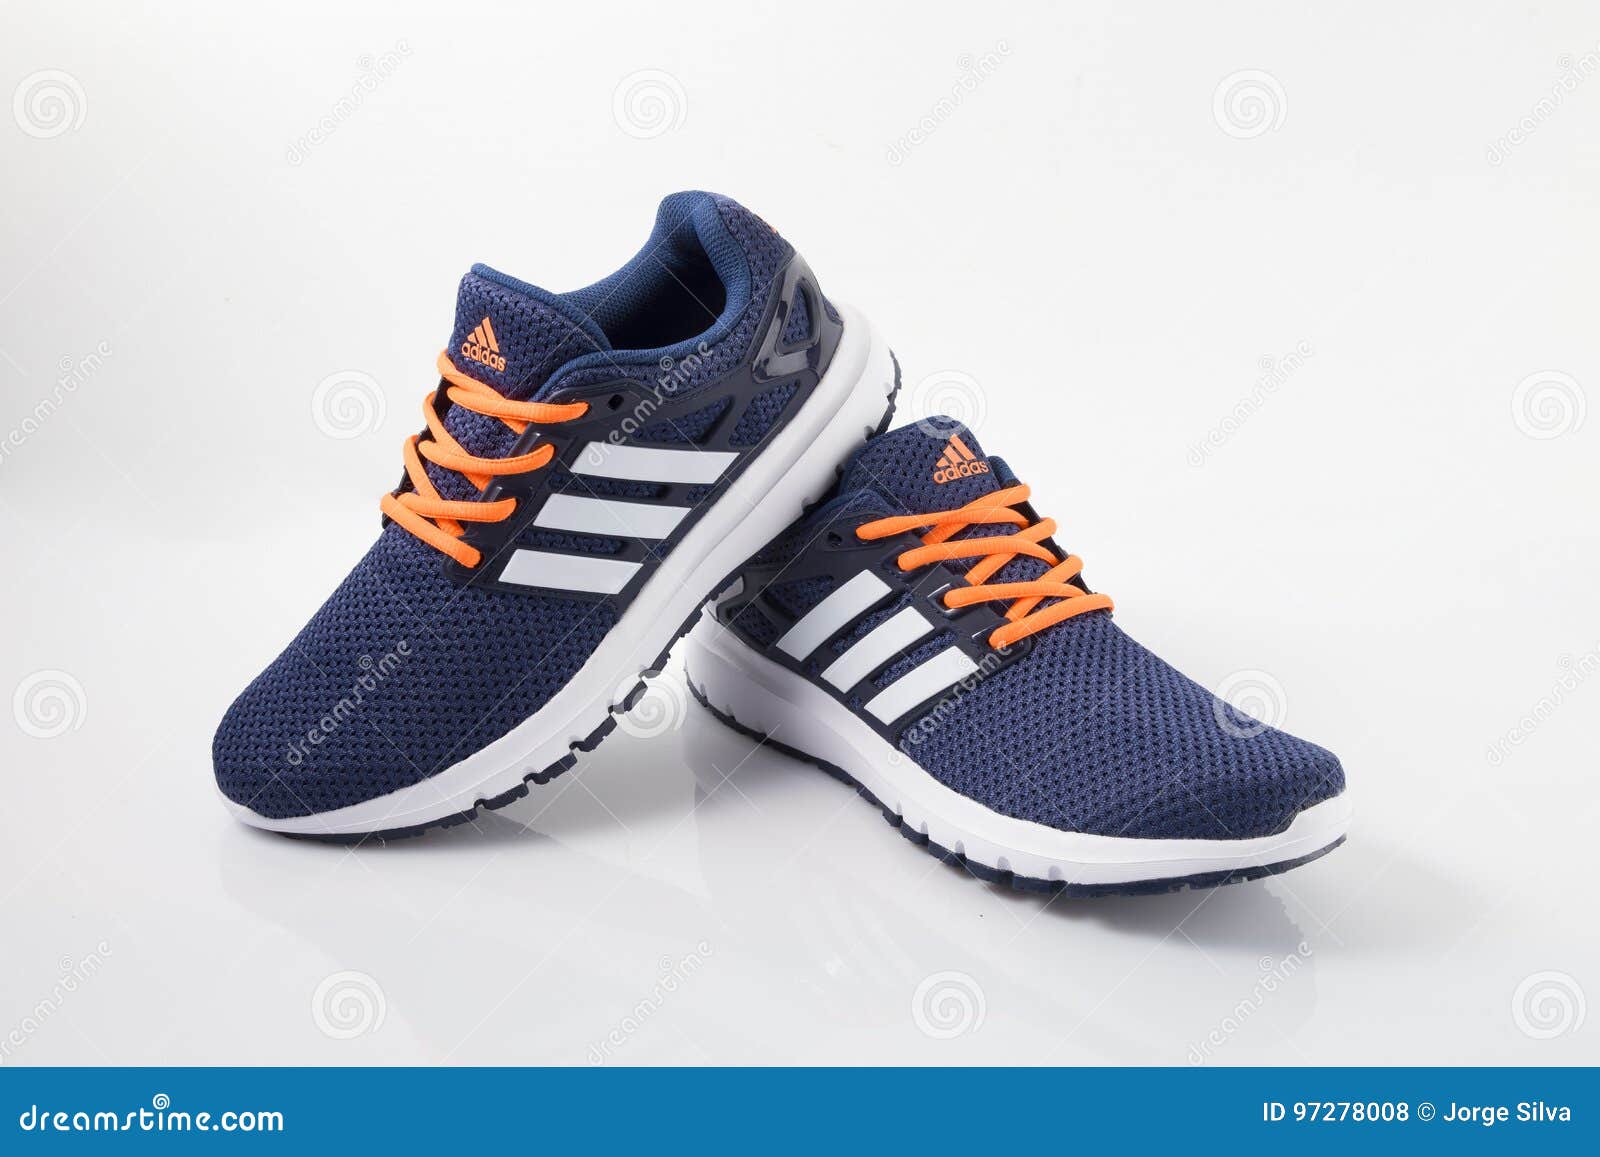 Adidas Classic Sneaker. Top View Editorial Stock Photo - Image of ...